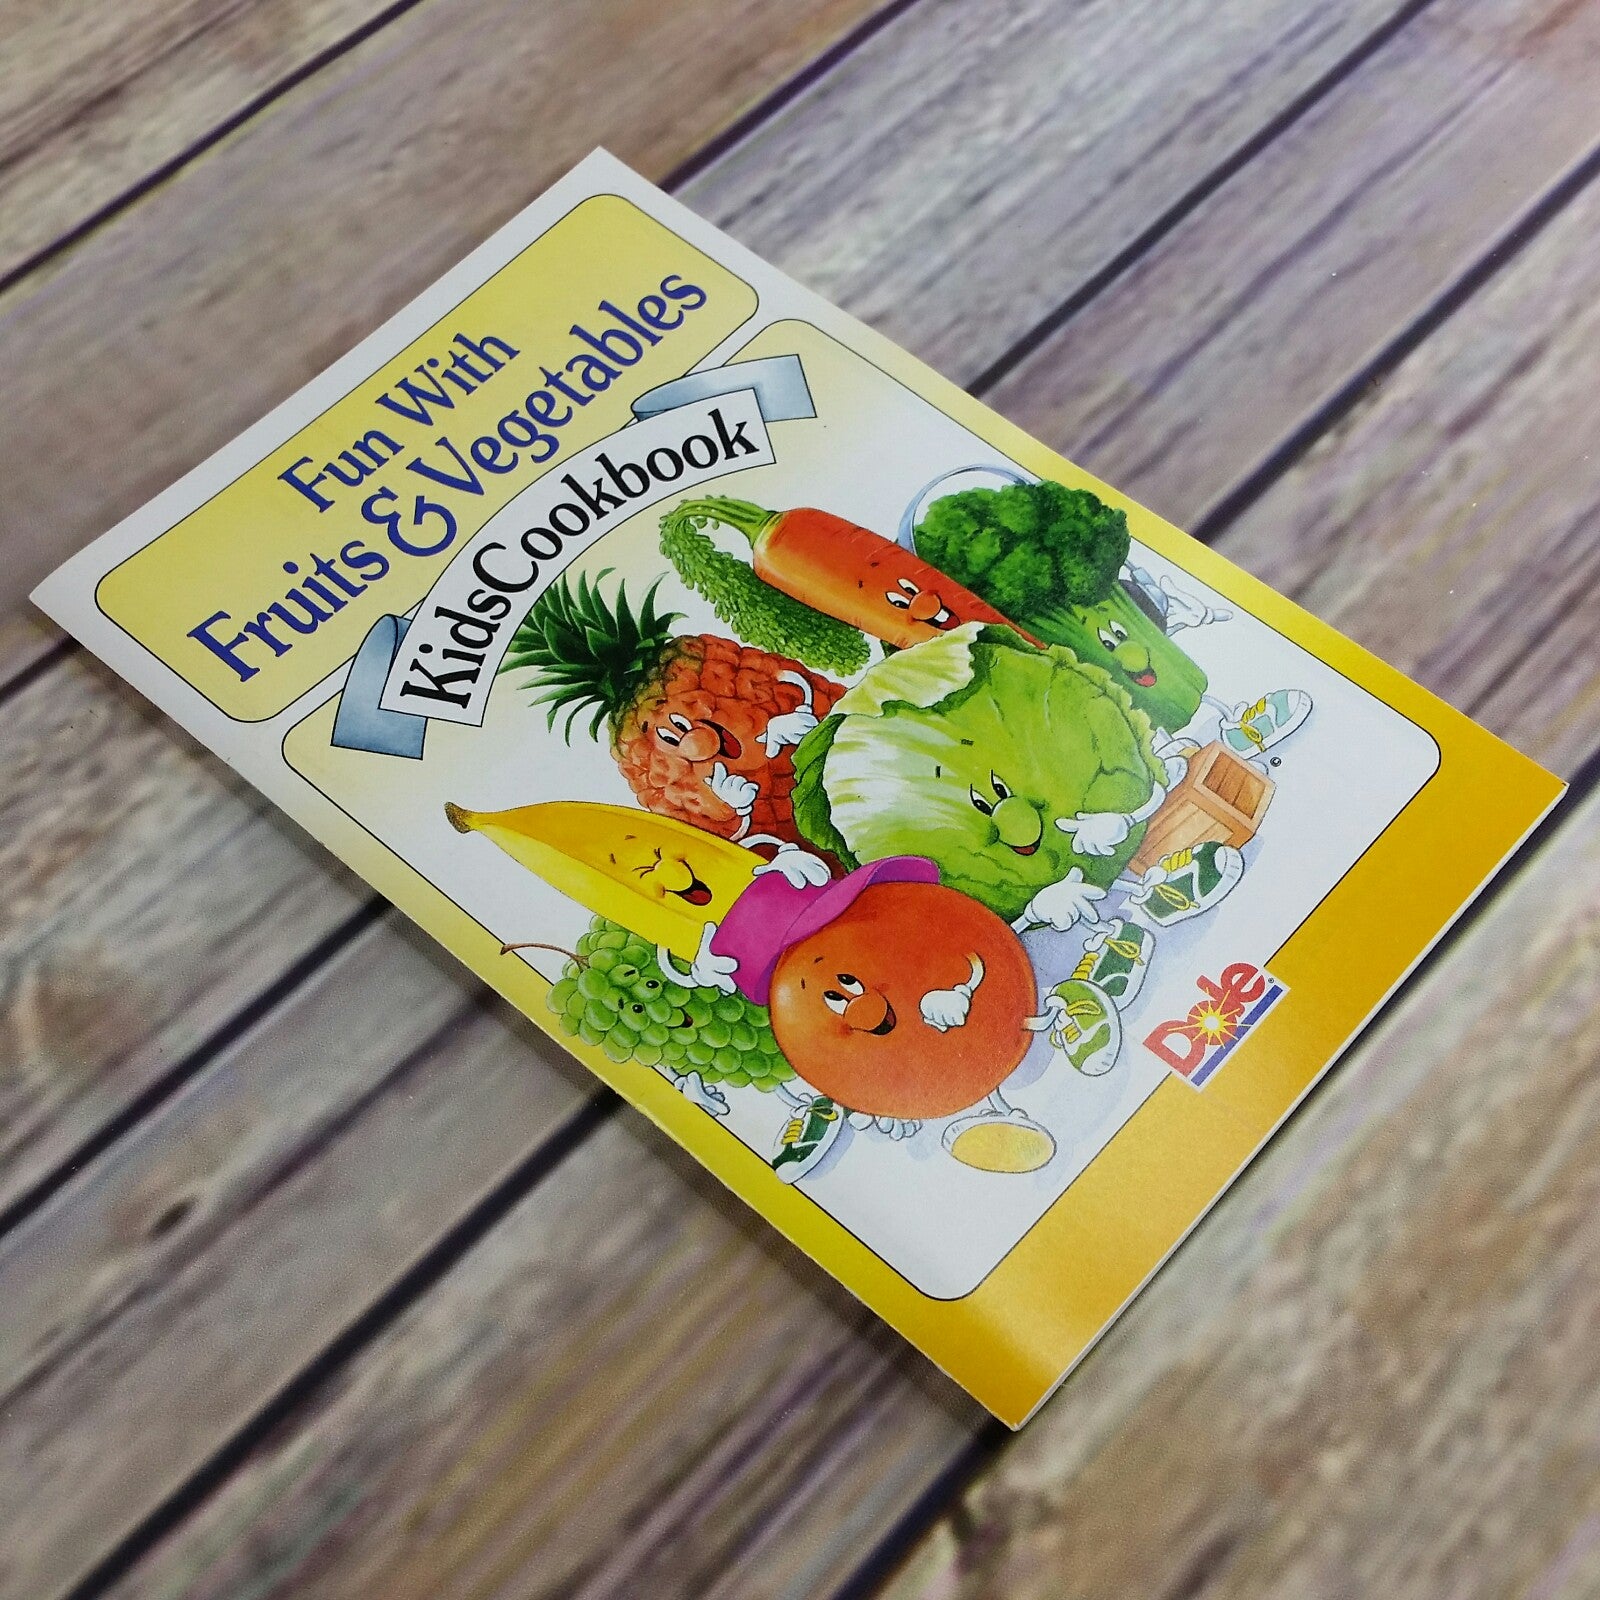 Vintage Cook Book Dole Fruit Promotional Recipes Fun with Fruits and Vegetables Kids Cookbook 1992 - At Grandma's Table